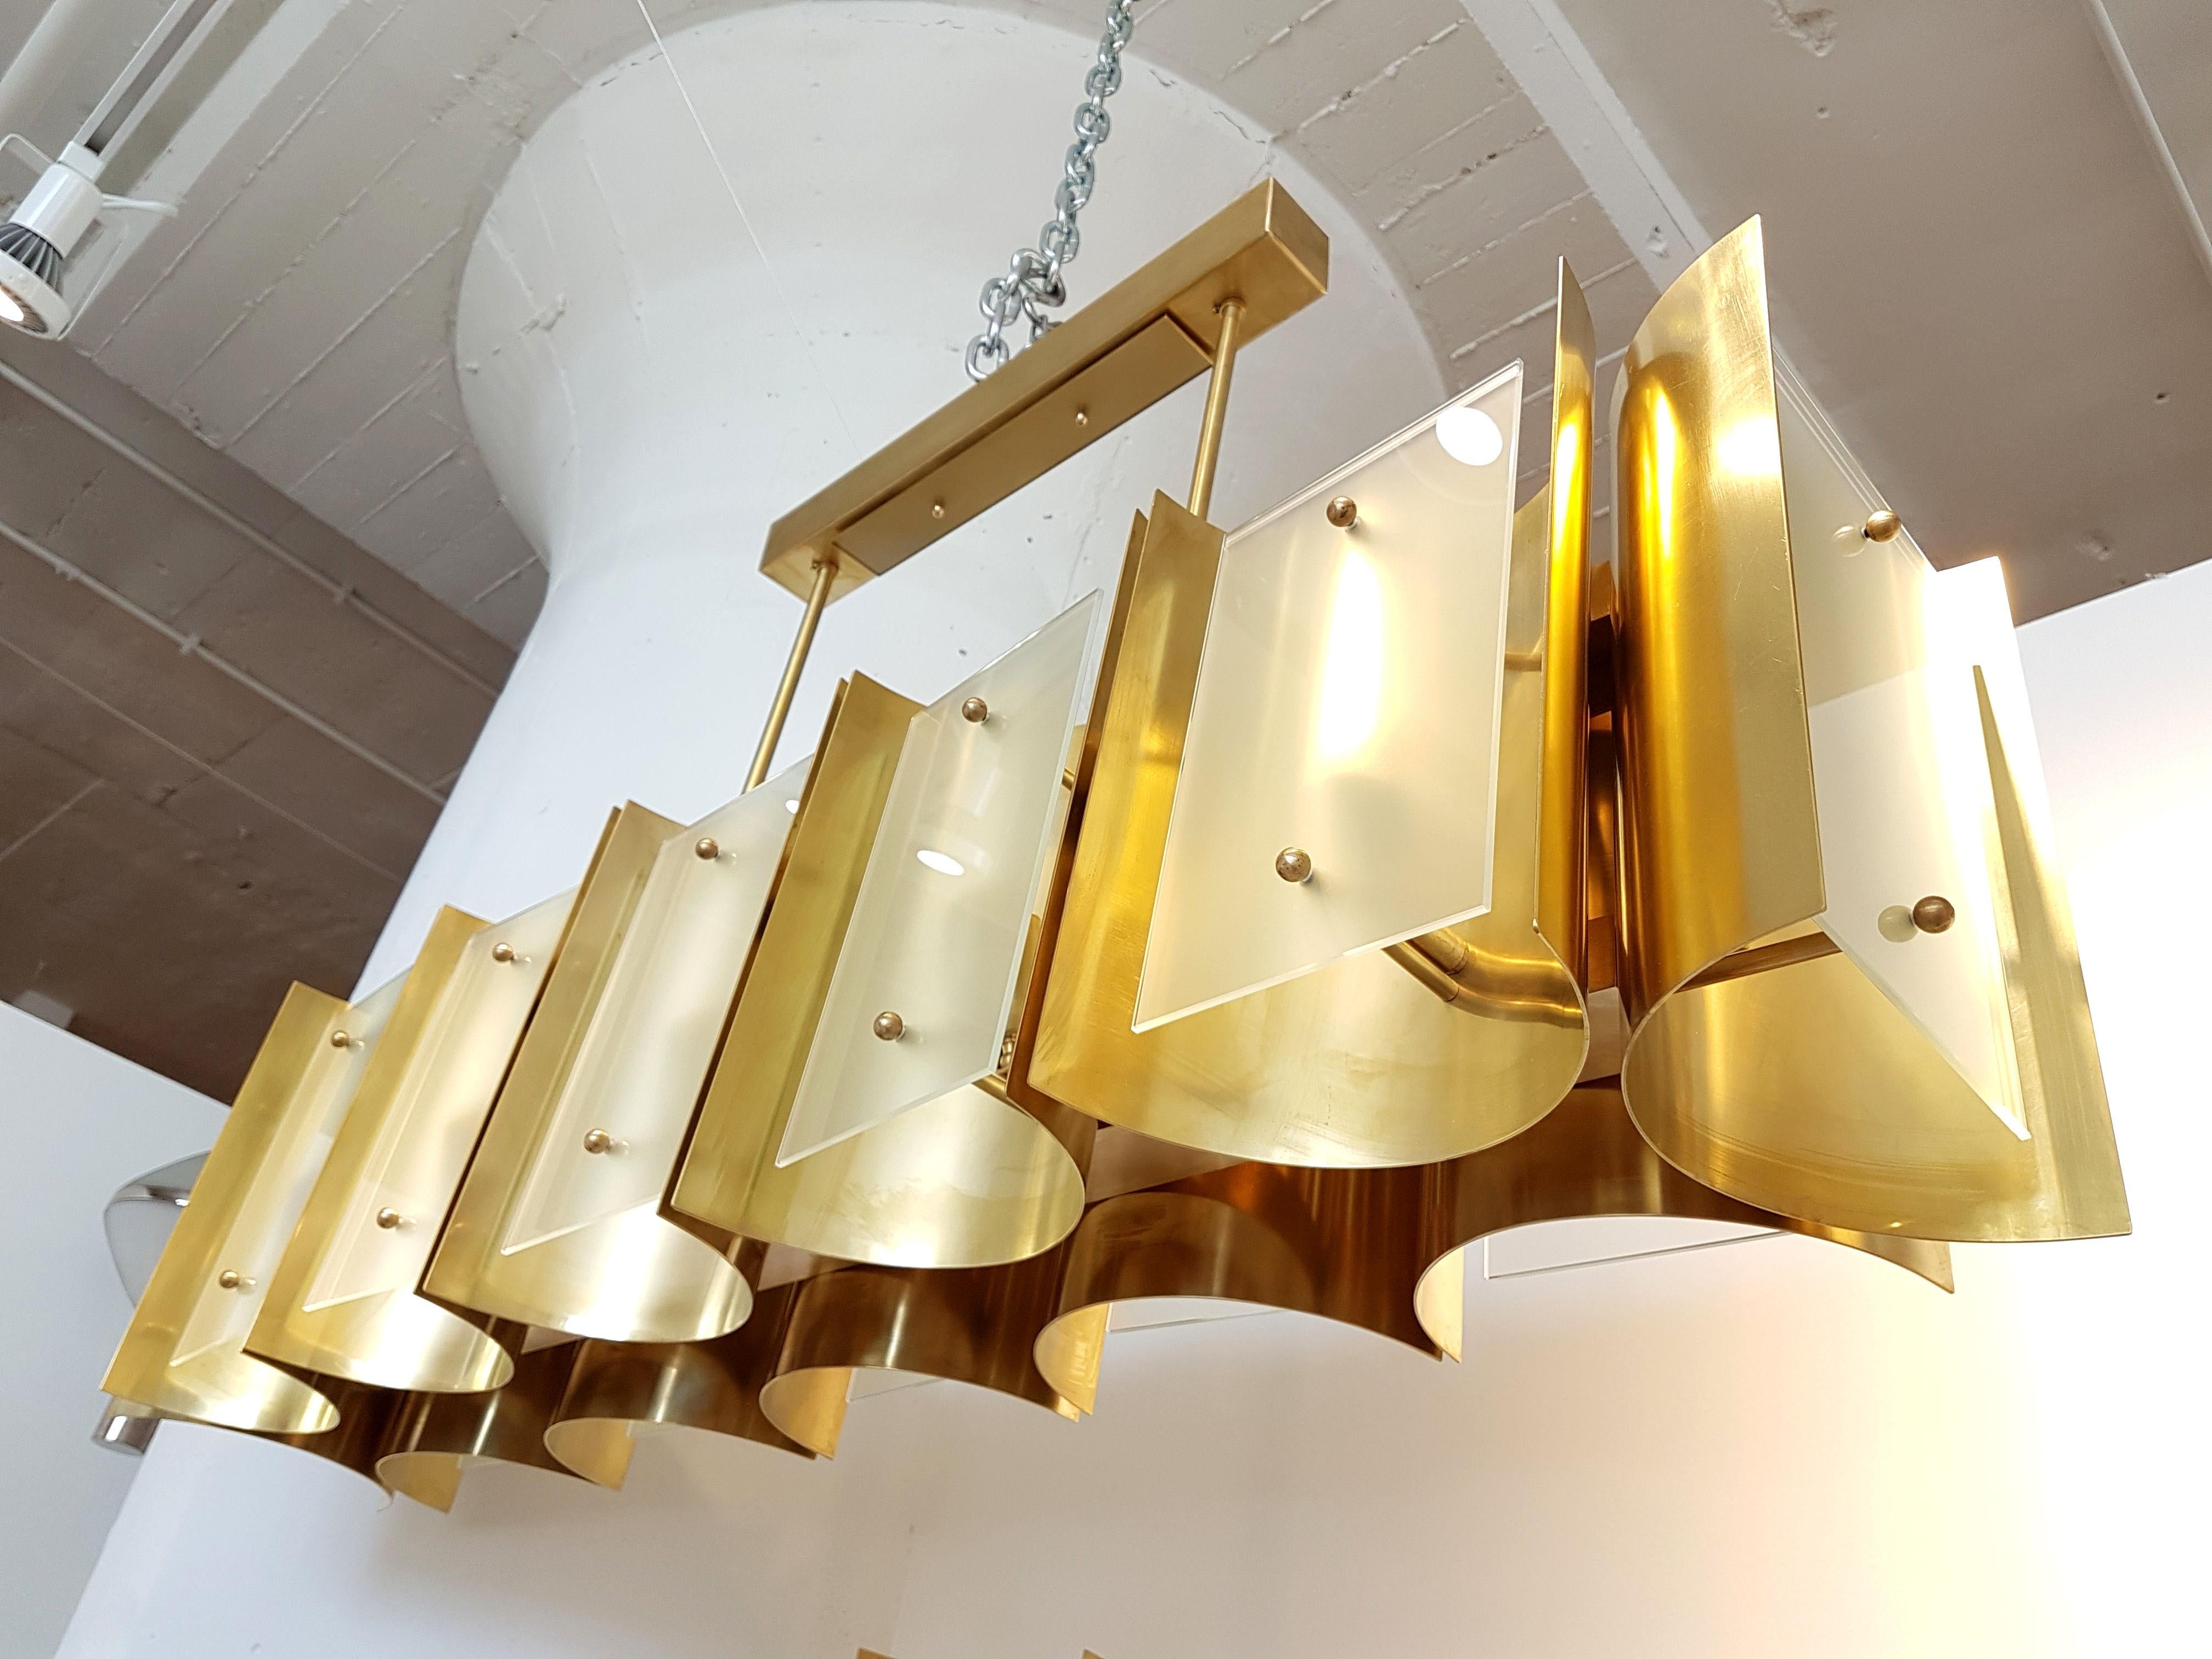 Chandelier or flush mount light, made of 12 polished brass sheets, curved, nesting the light and covered up by a frosted glass. 
Rectangular shape, with 12 candelabra base lights,
1 chandelier available.
Perfect over a table/kitchen